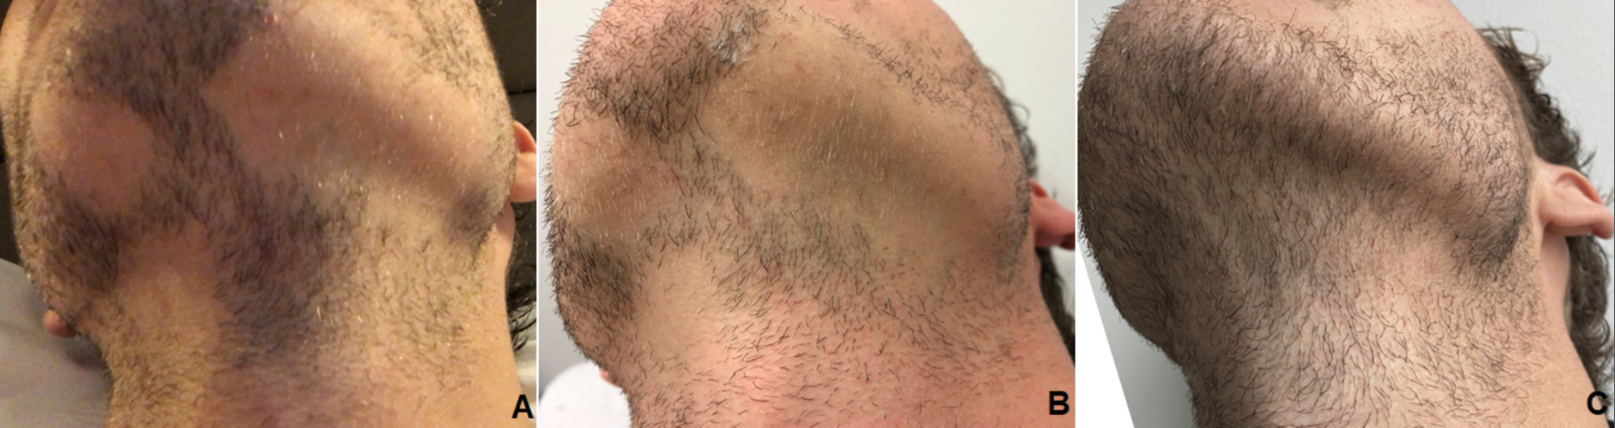 Hair regrowth after PRP treatment